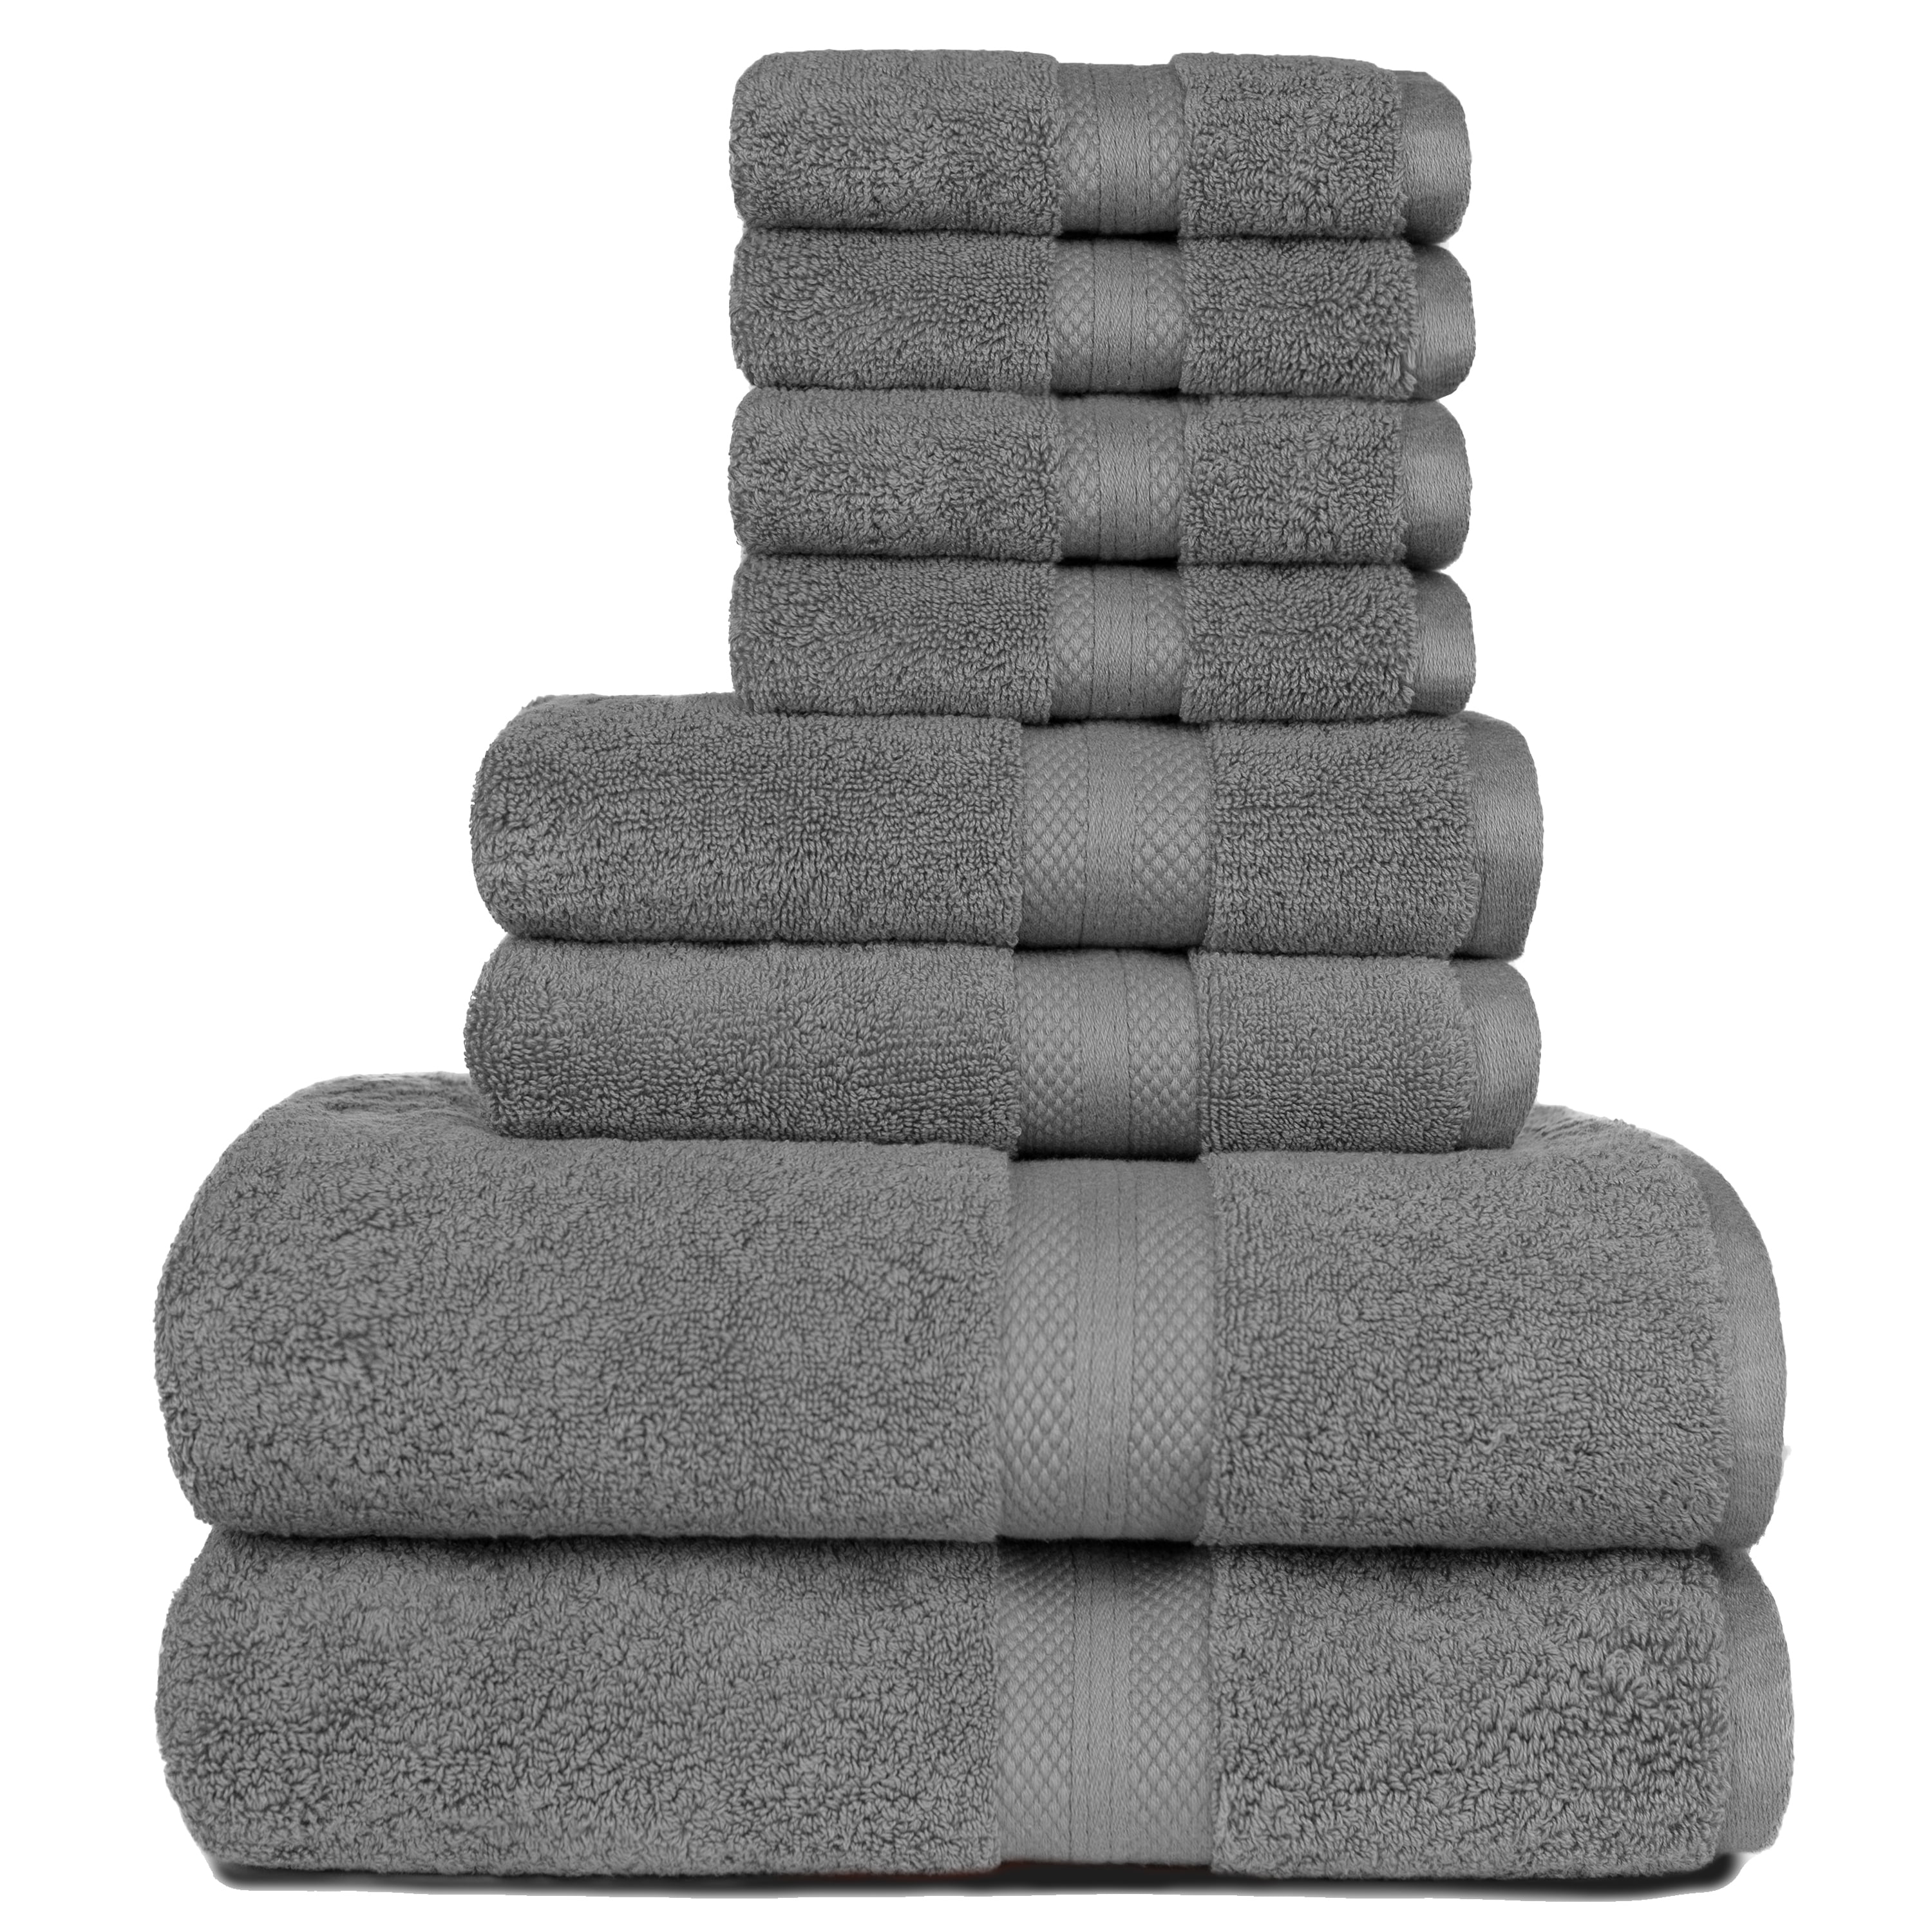 Bennett and Shea 8-Piece Luxury Bath Towel Set, Odor Resistant, Premium  Towels for Bathroom, Highly Absorbent and Quick Dry Bath Towels, Extra Soft